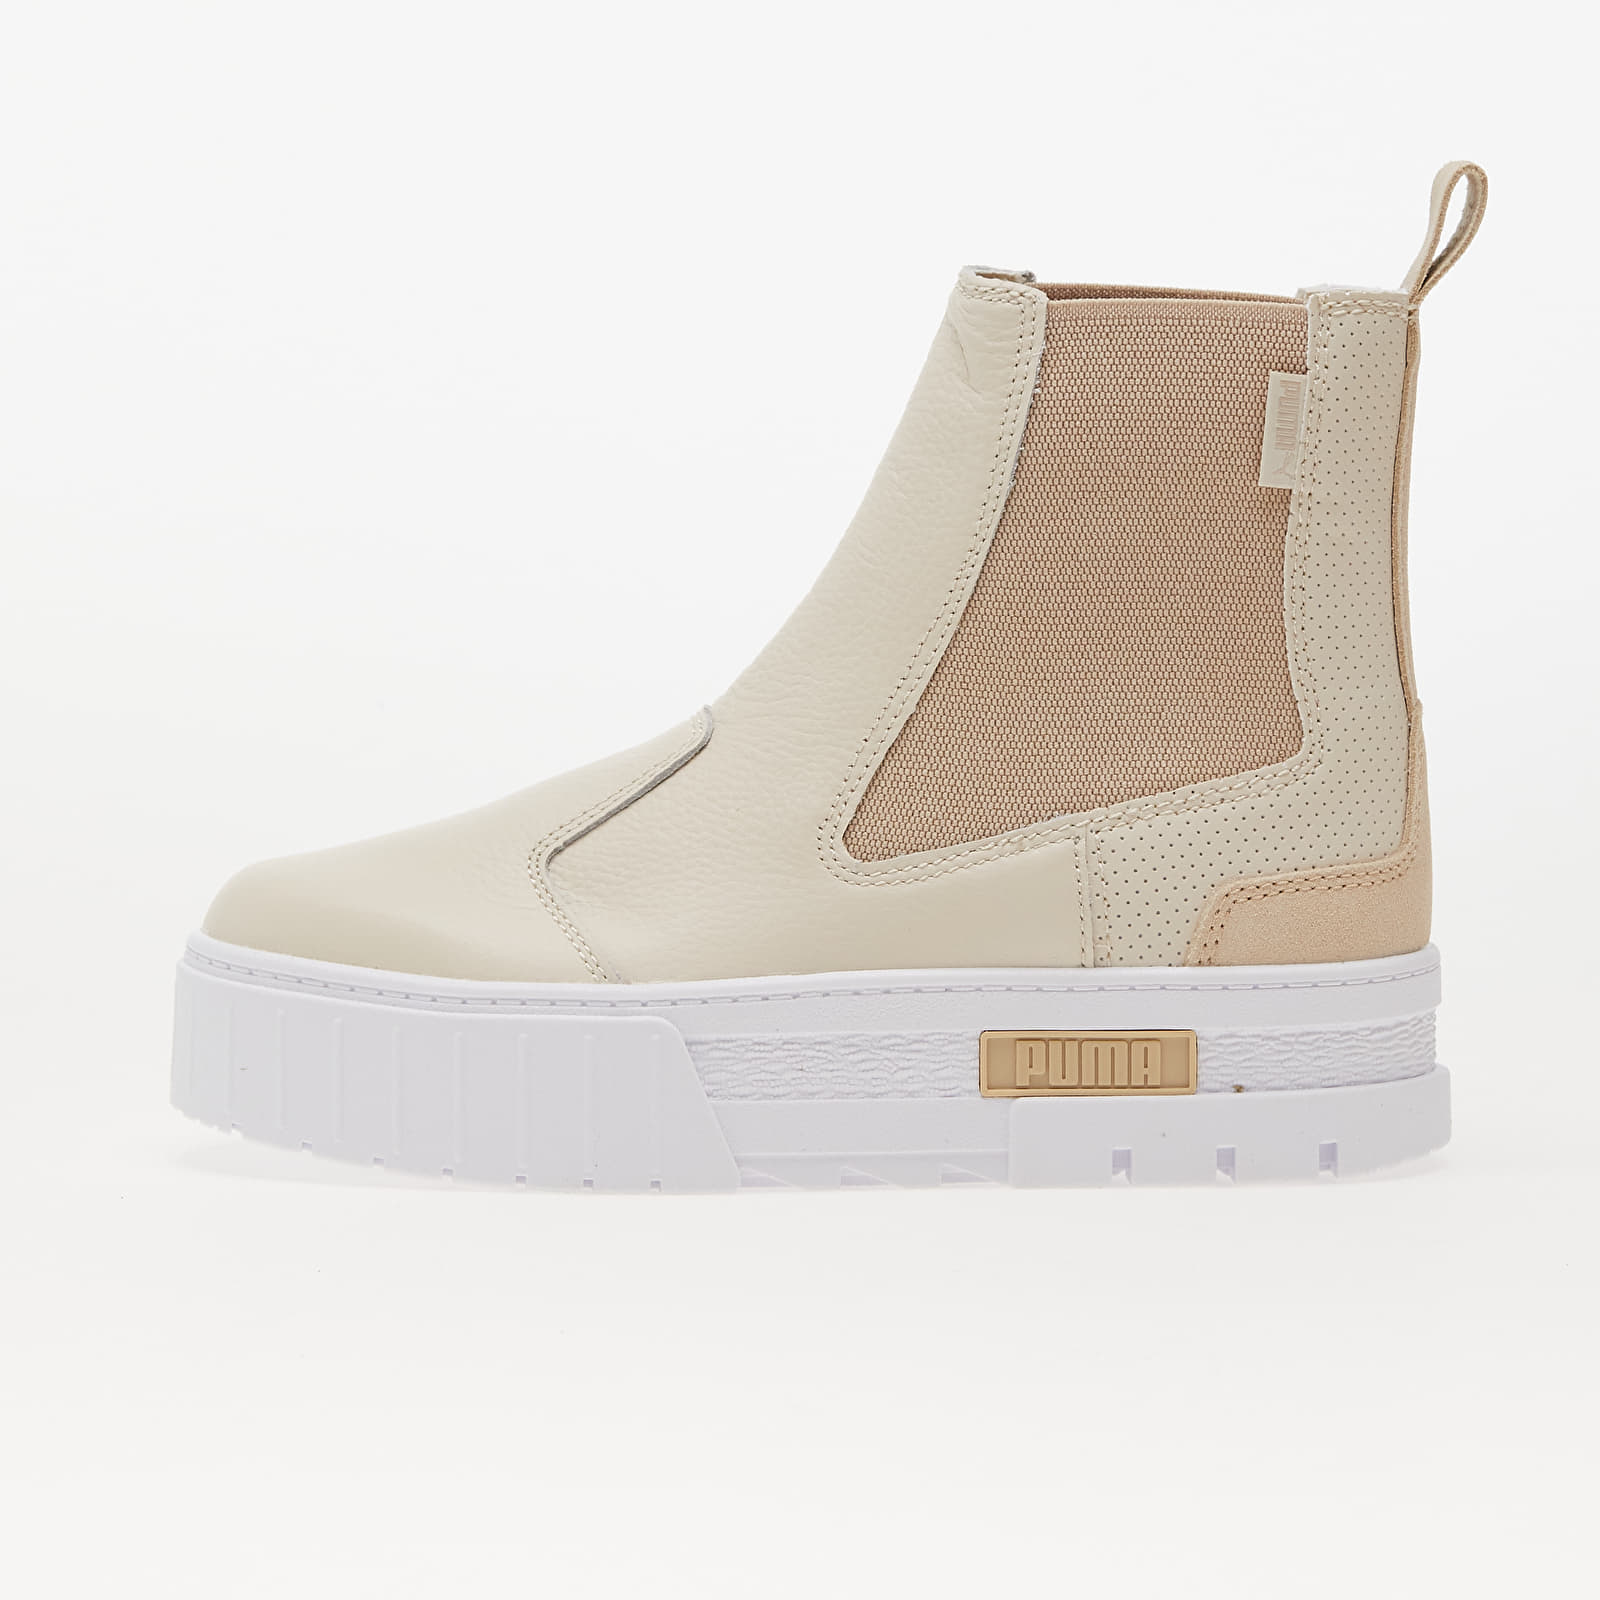 Chaussures et baskets femme Puma Mayze Chelsea Luxe Wns White